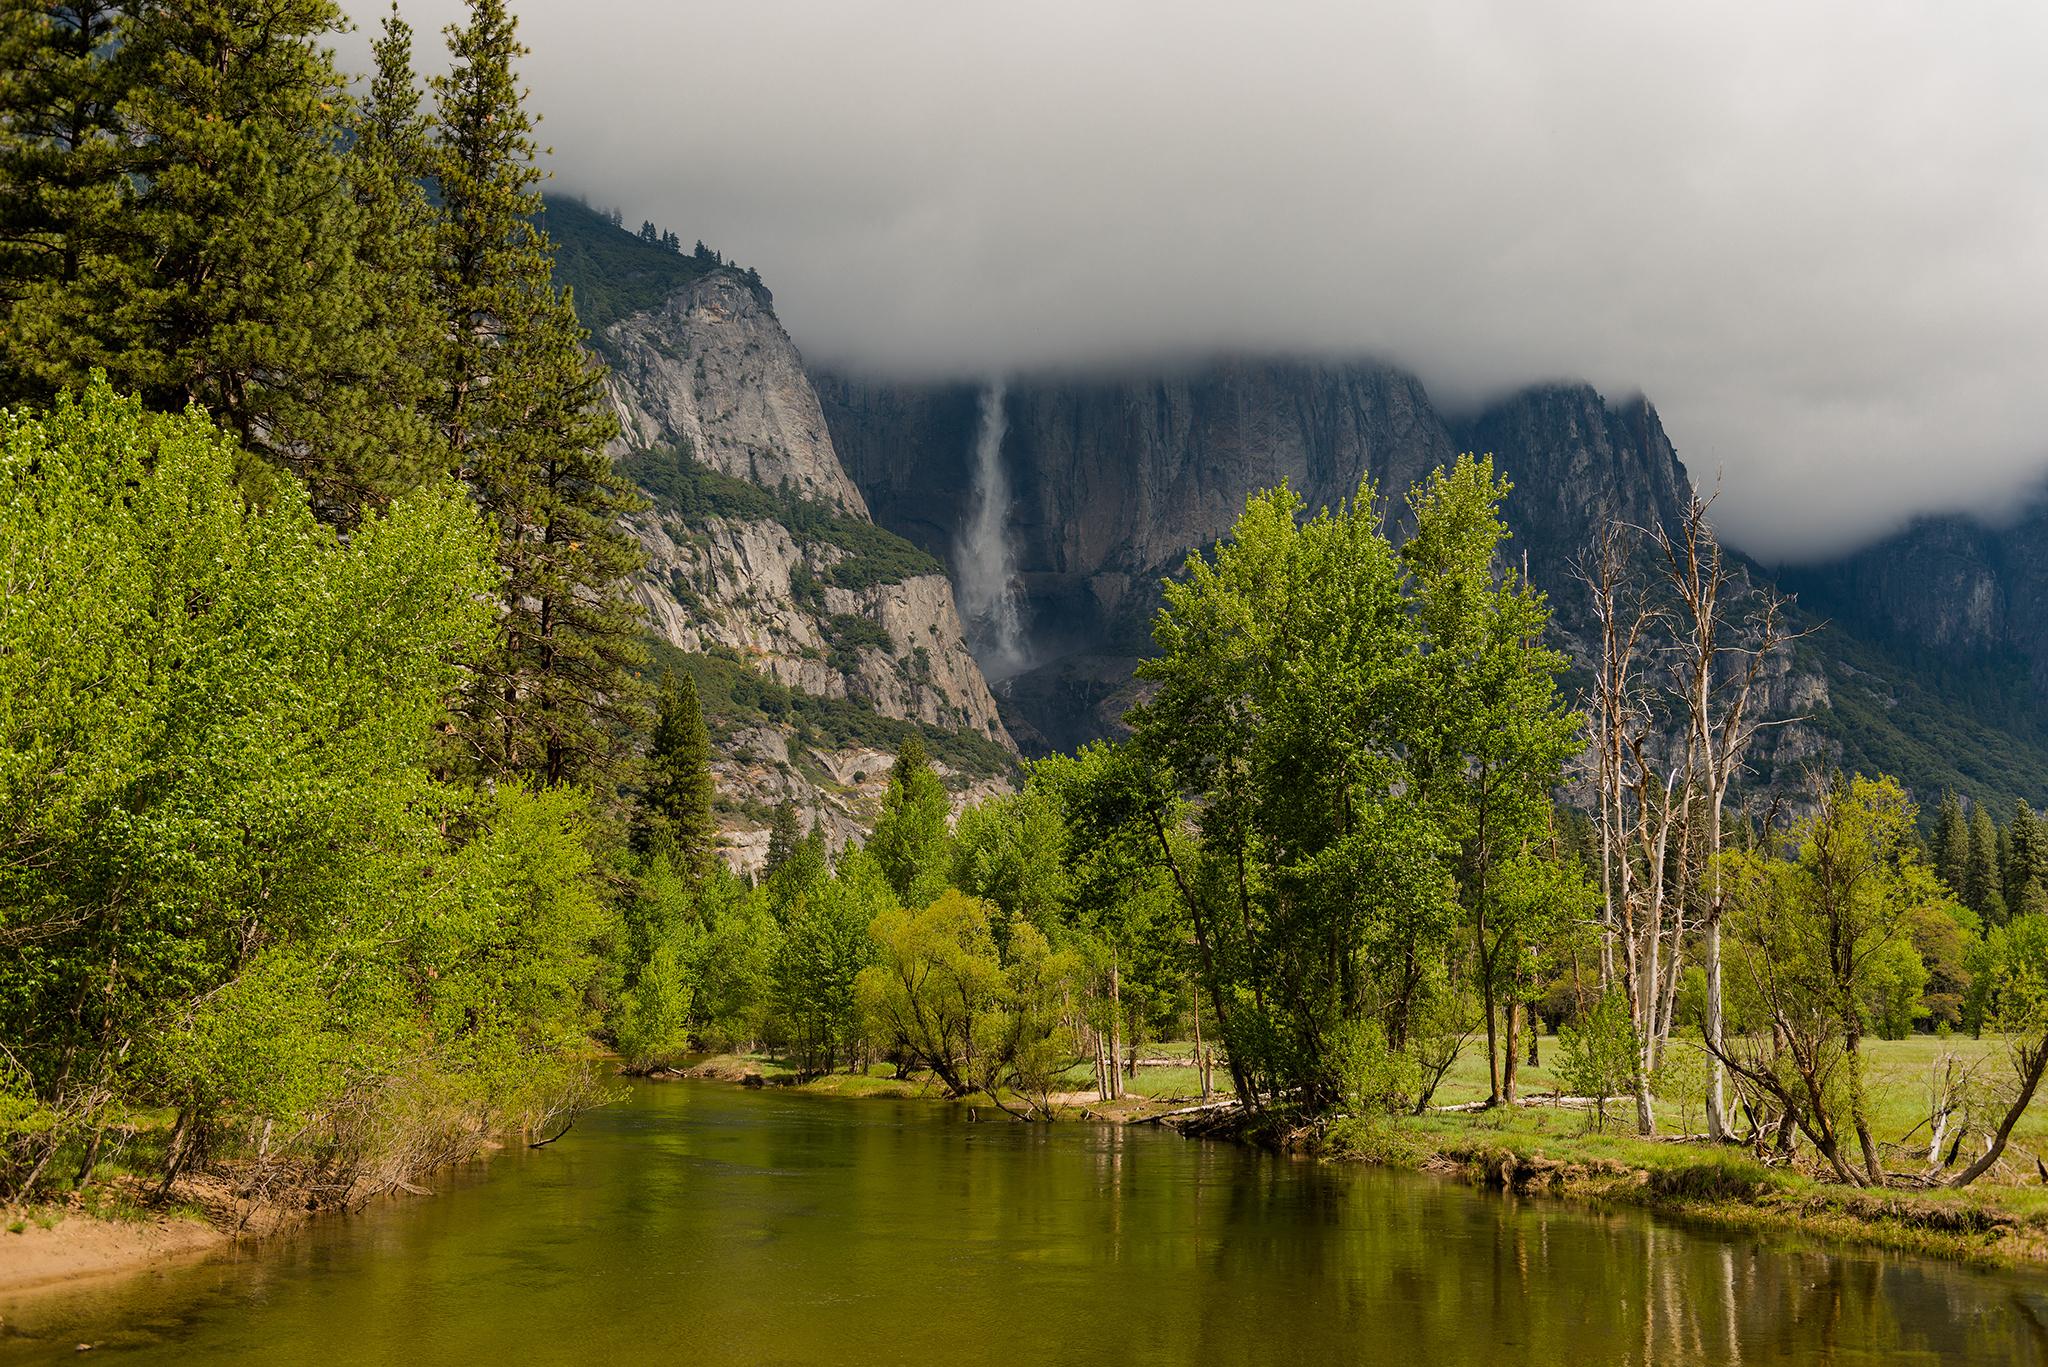 Wallpapers yosemite national park mountains river on the desktop